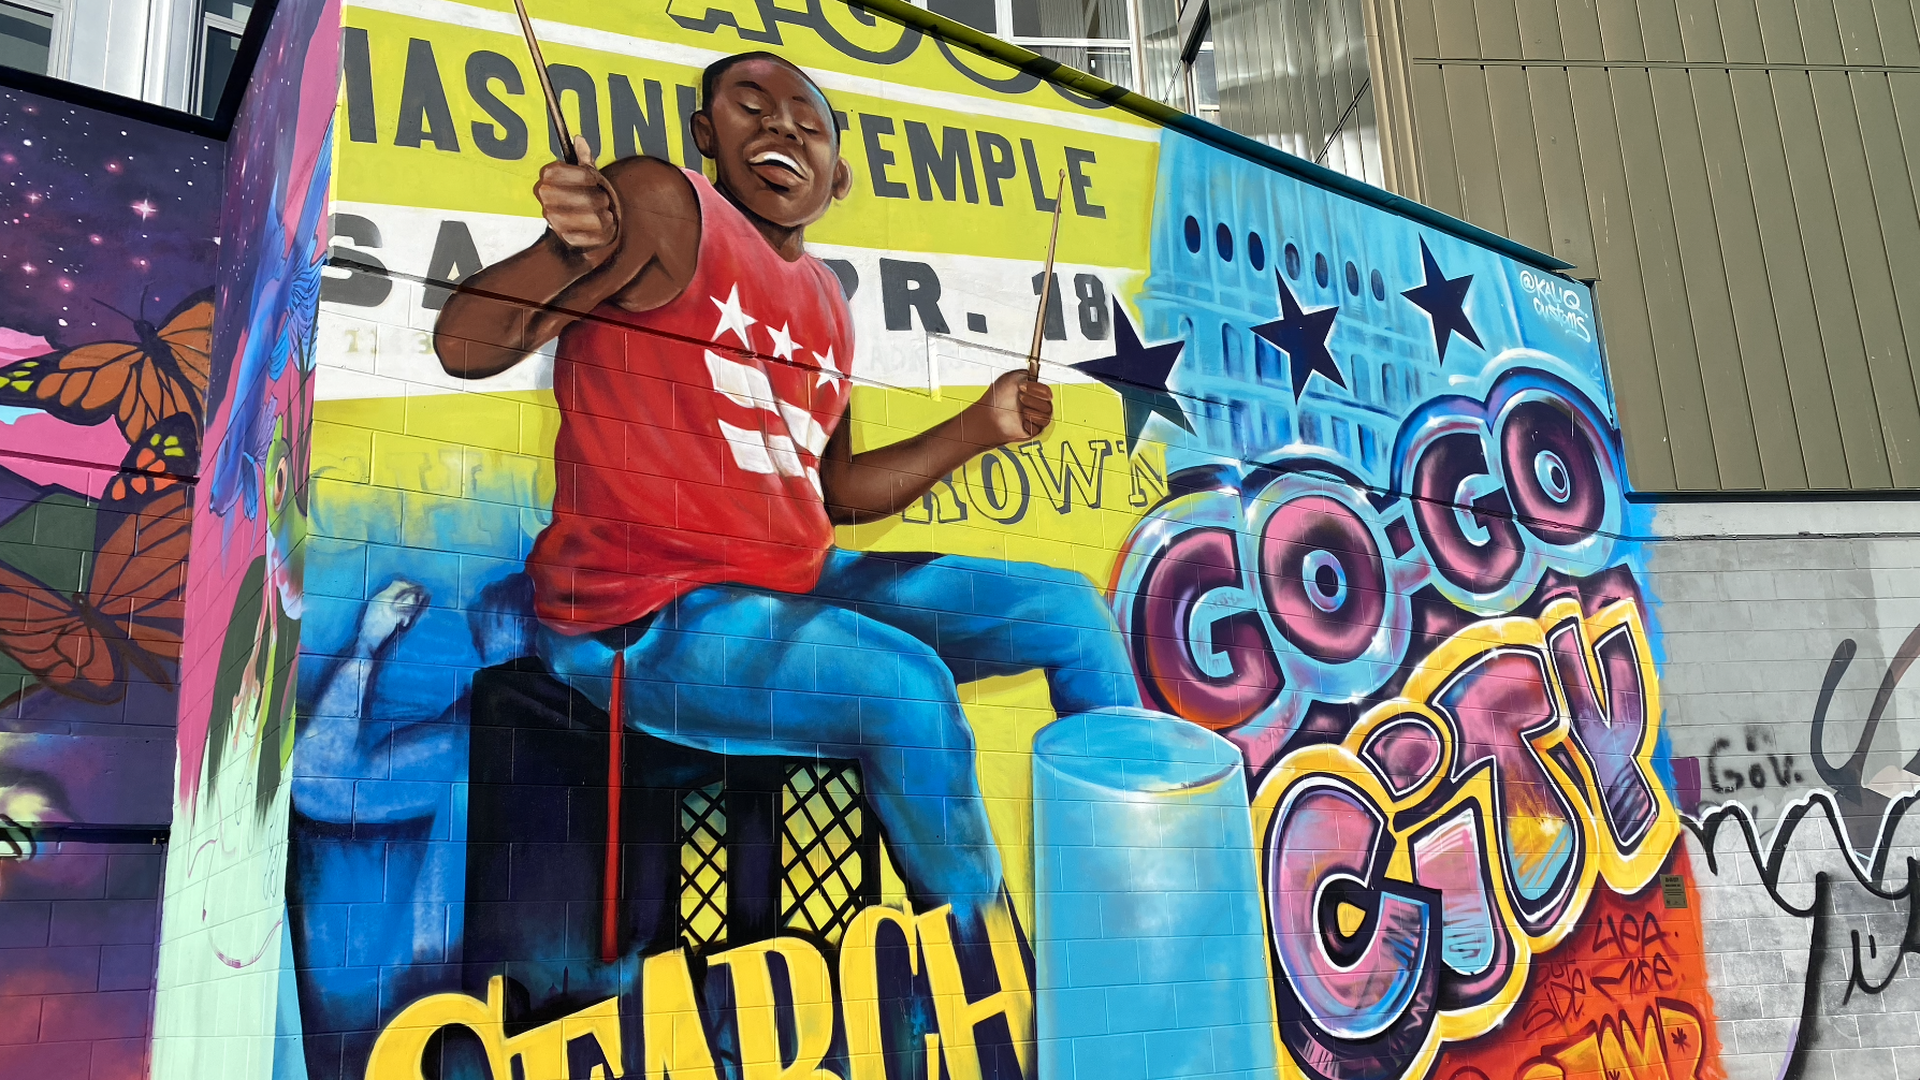 A brightly-colored mural showing a young Black boy playing the drums on an overturned bin.